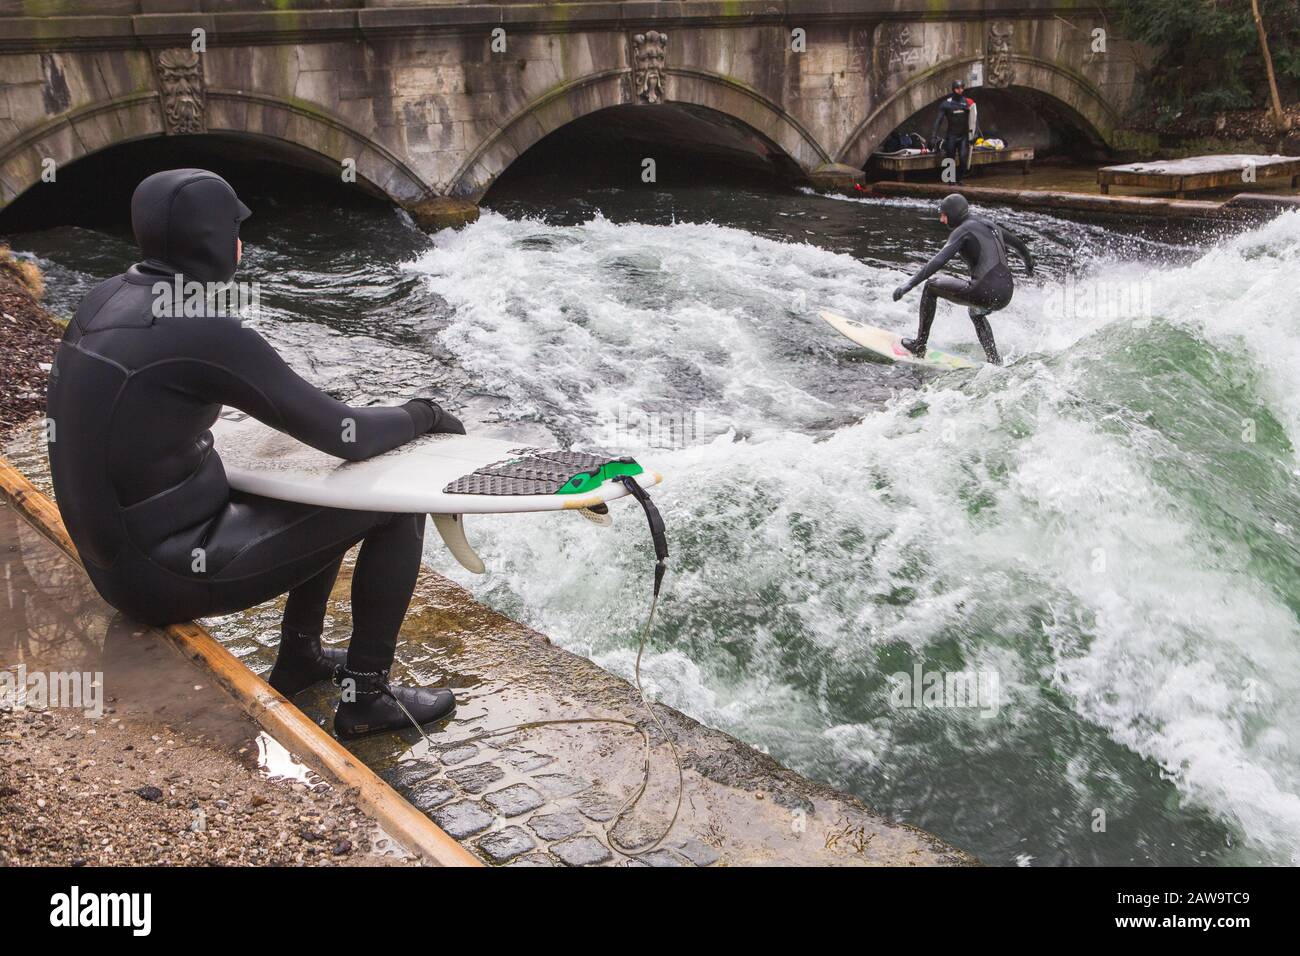 Surfer surfing an artificial wave in Munich city center, Germany Stock Photo